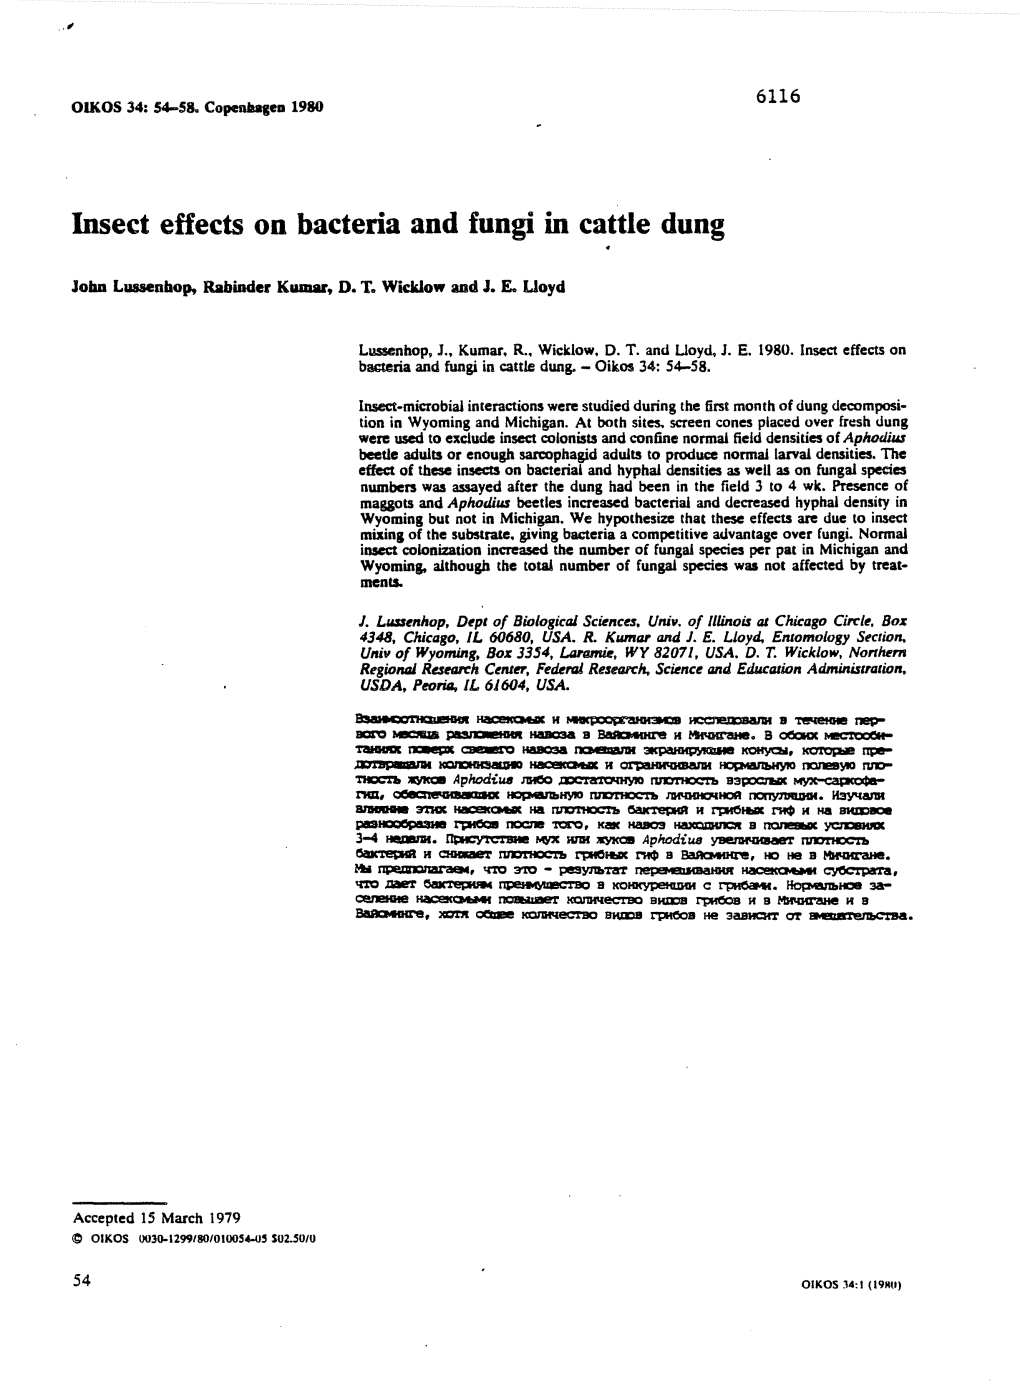 Insect Effects on Bacteria and Fungi in Cattle Dung